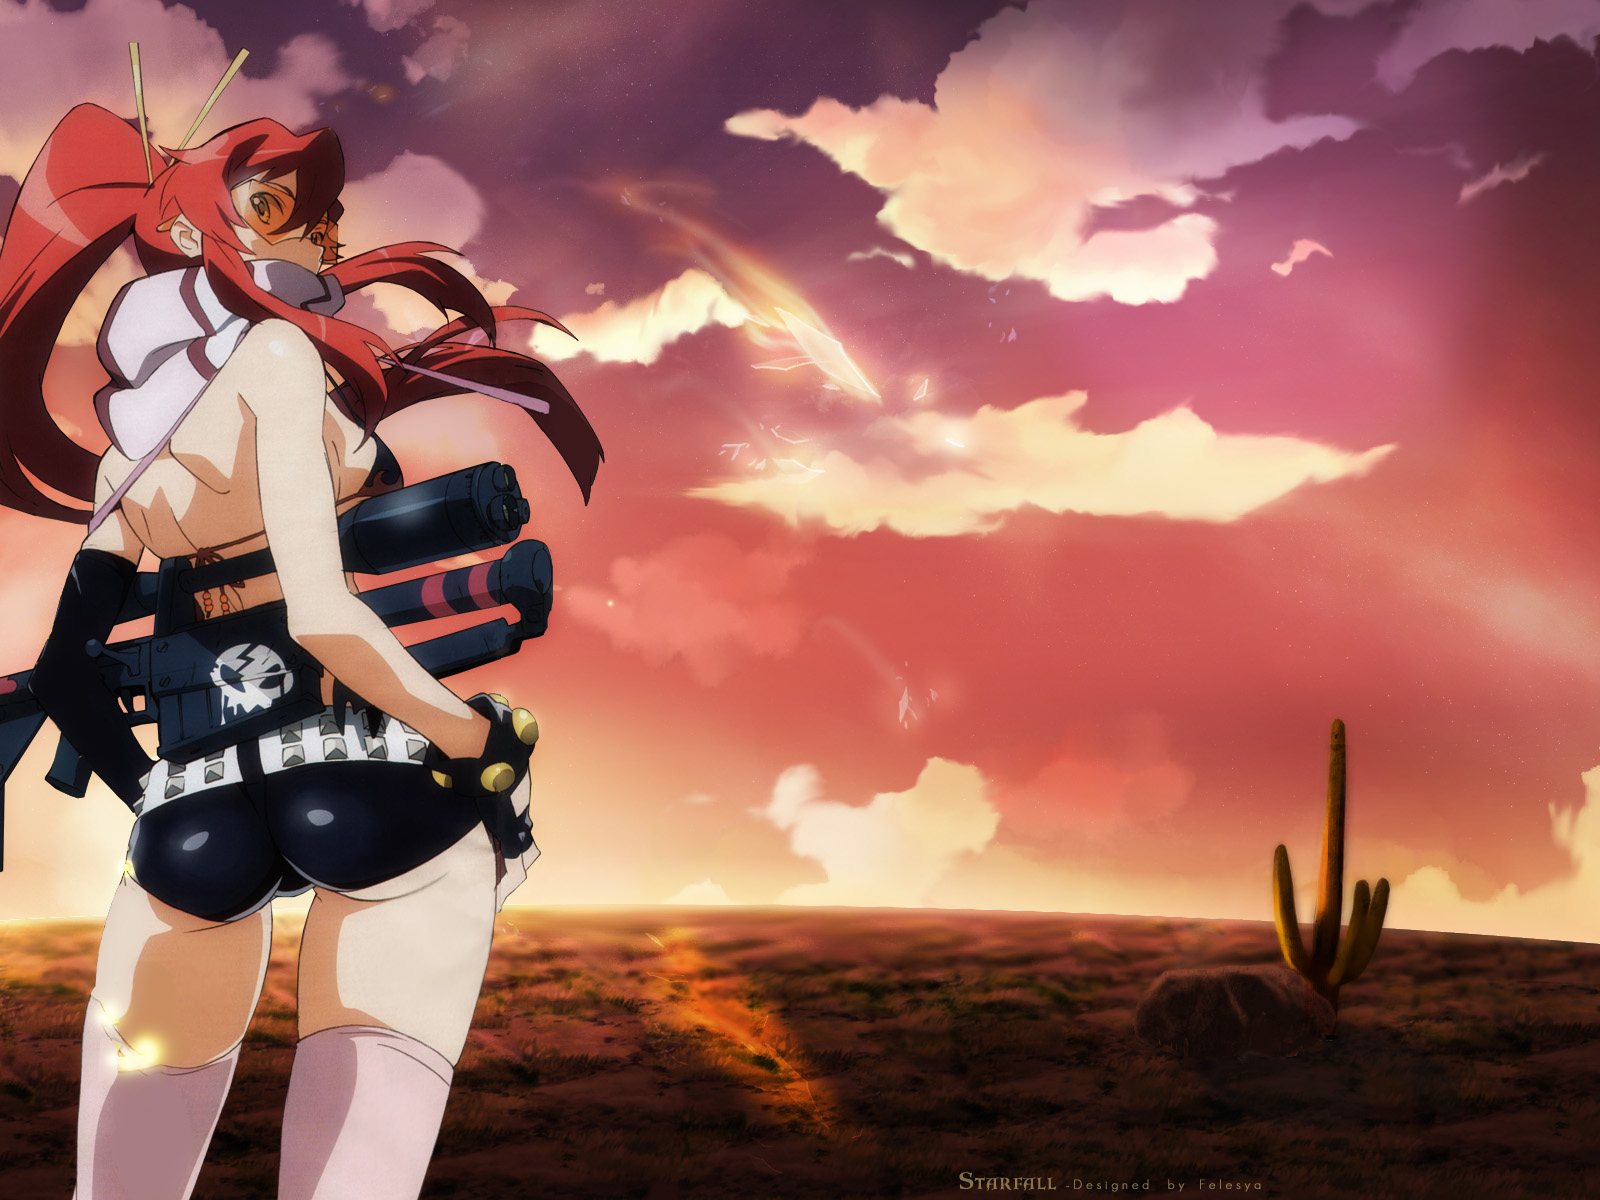 Glasses red hair, thigh highs, scarf, sunset Free Stock Photos